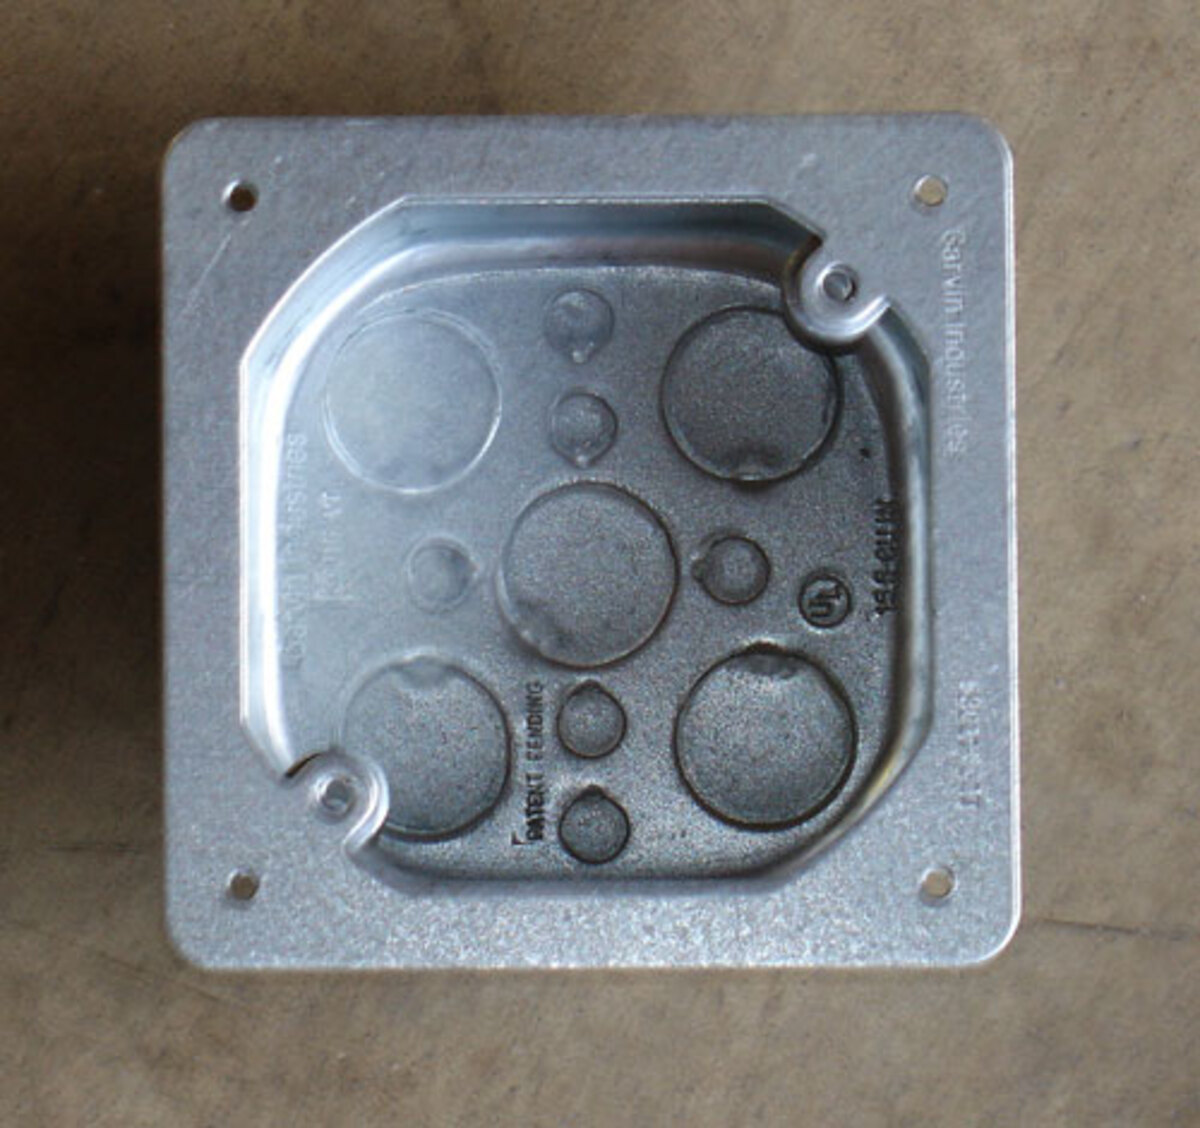 4" Octagon To 4" Square Adapter Plate